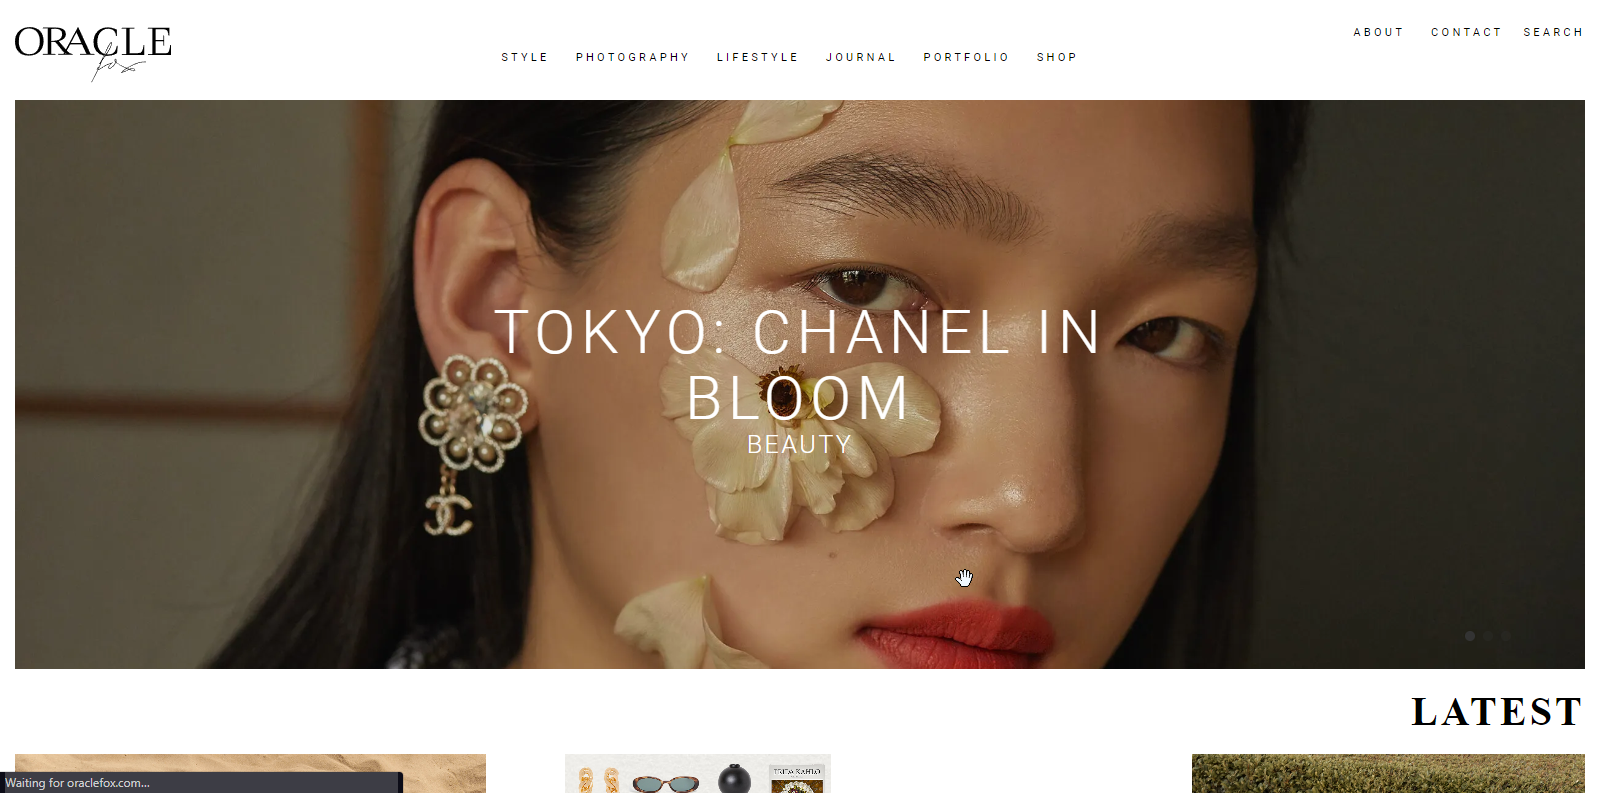 35 Trendiest Fashion Blog Examples in 2023 - 10Web